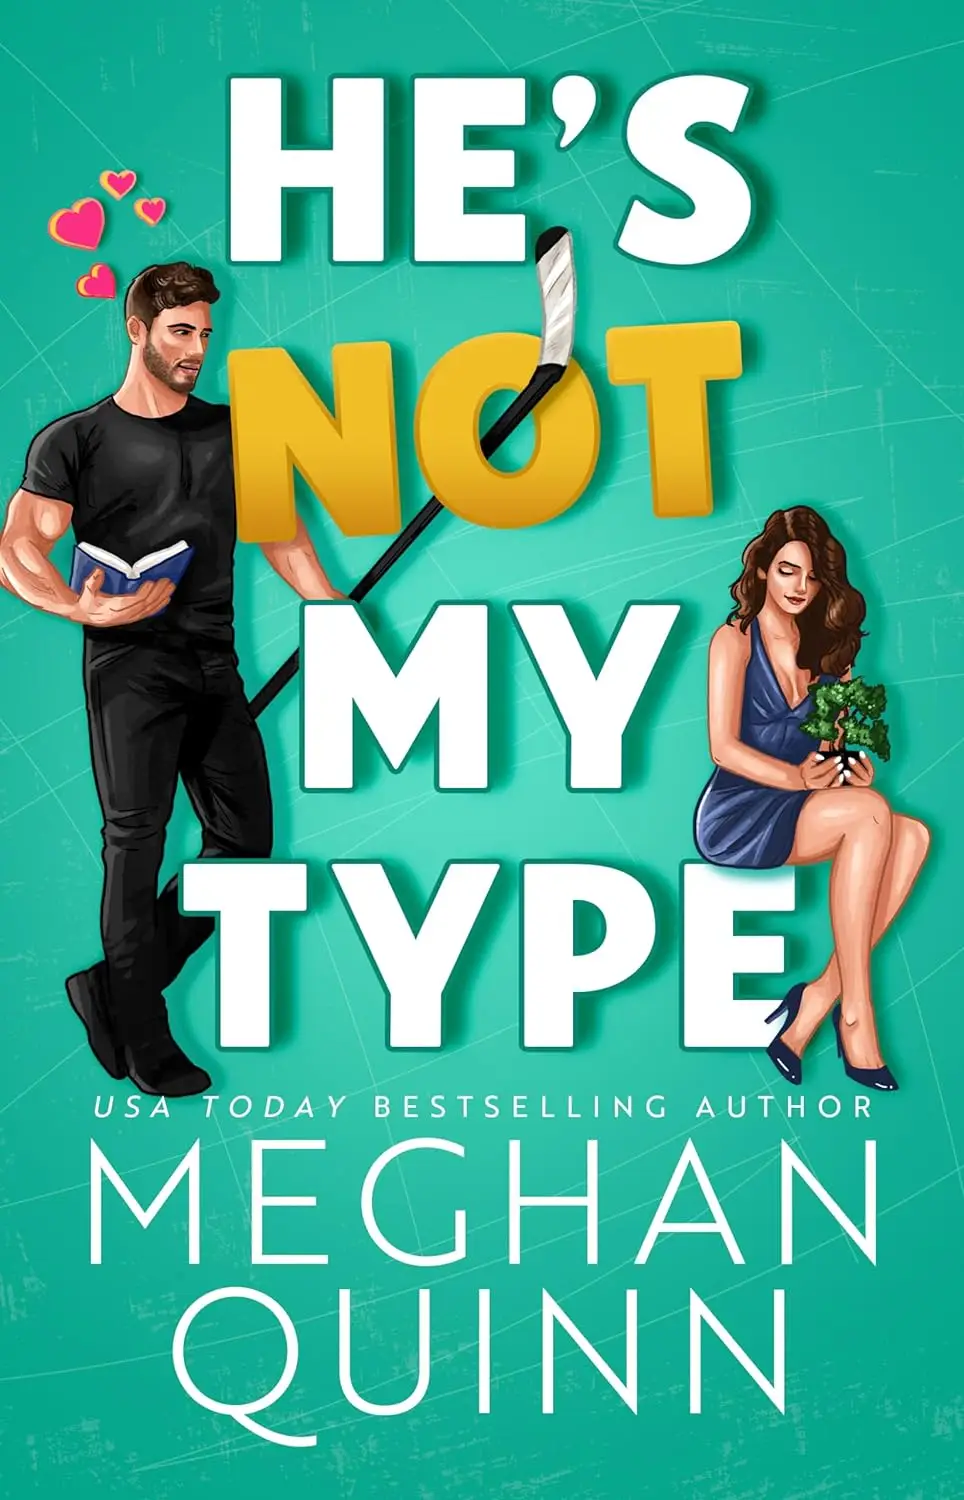 Book 4 in The Vancouver Agitators Series by Meghan Quinn, He's Not My Type.